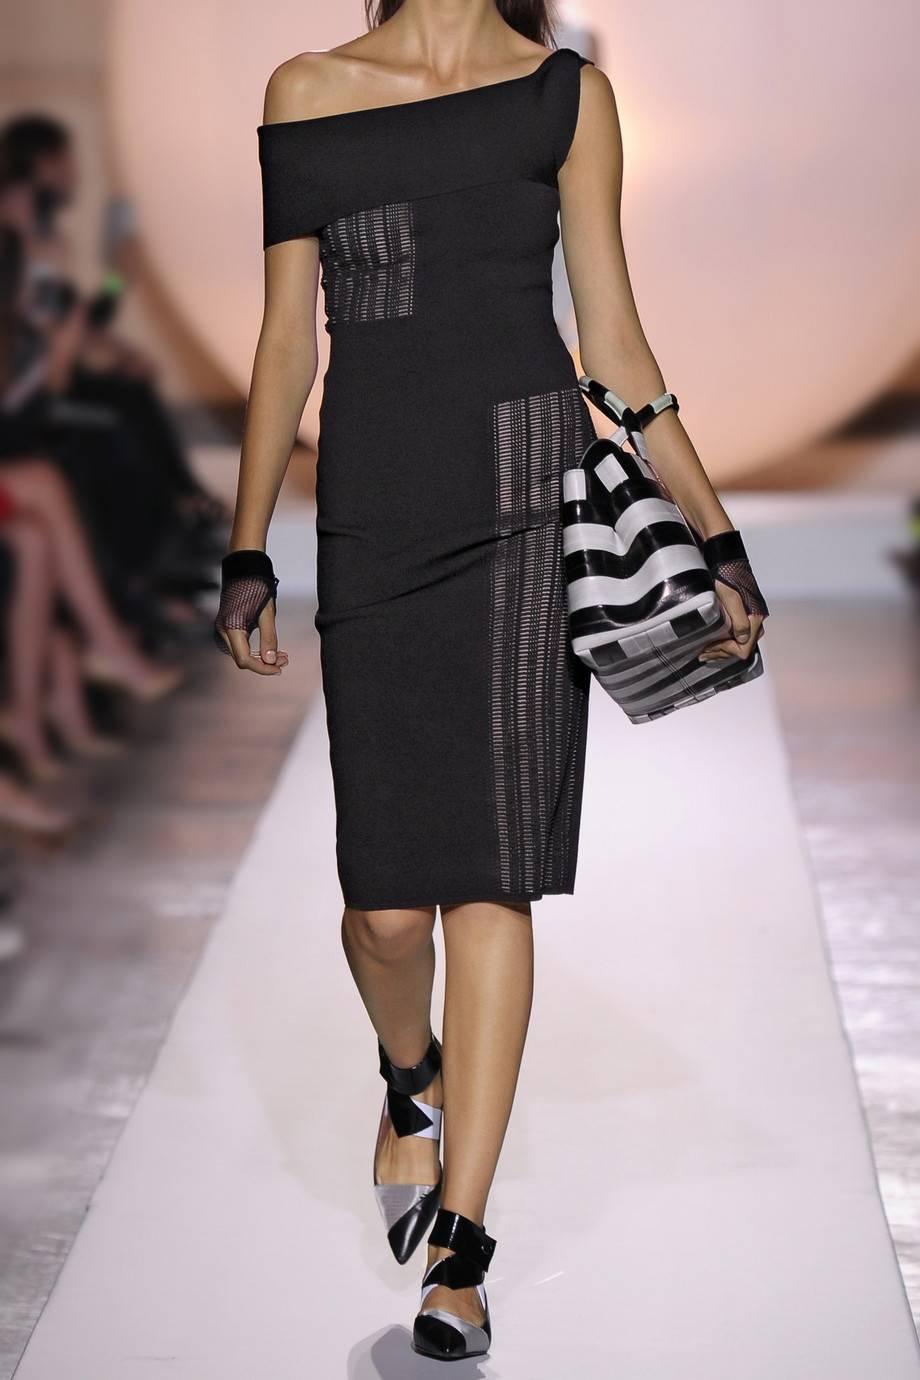 ROLAND MOURET Mable Black stretch-jersey dress M

Roland Mouret's 'Mable' dress caught our eye on the Spring '14 runway - it's the perfect LBD update. 

This off-the-shoulder style is cut for a close fit and looks best with heels and simple